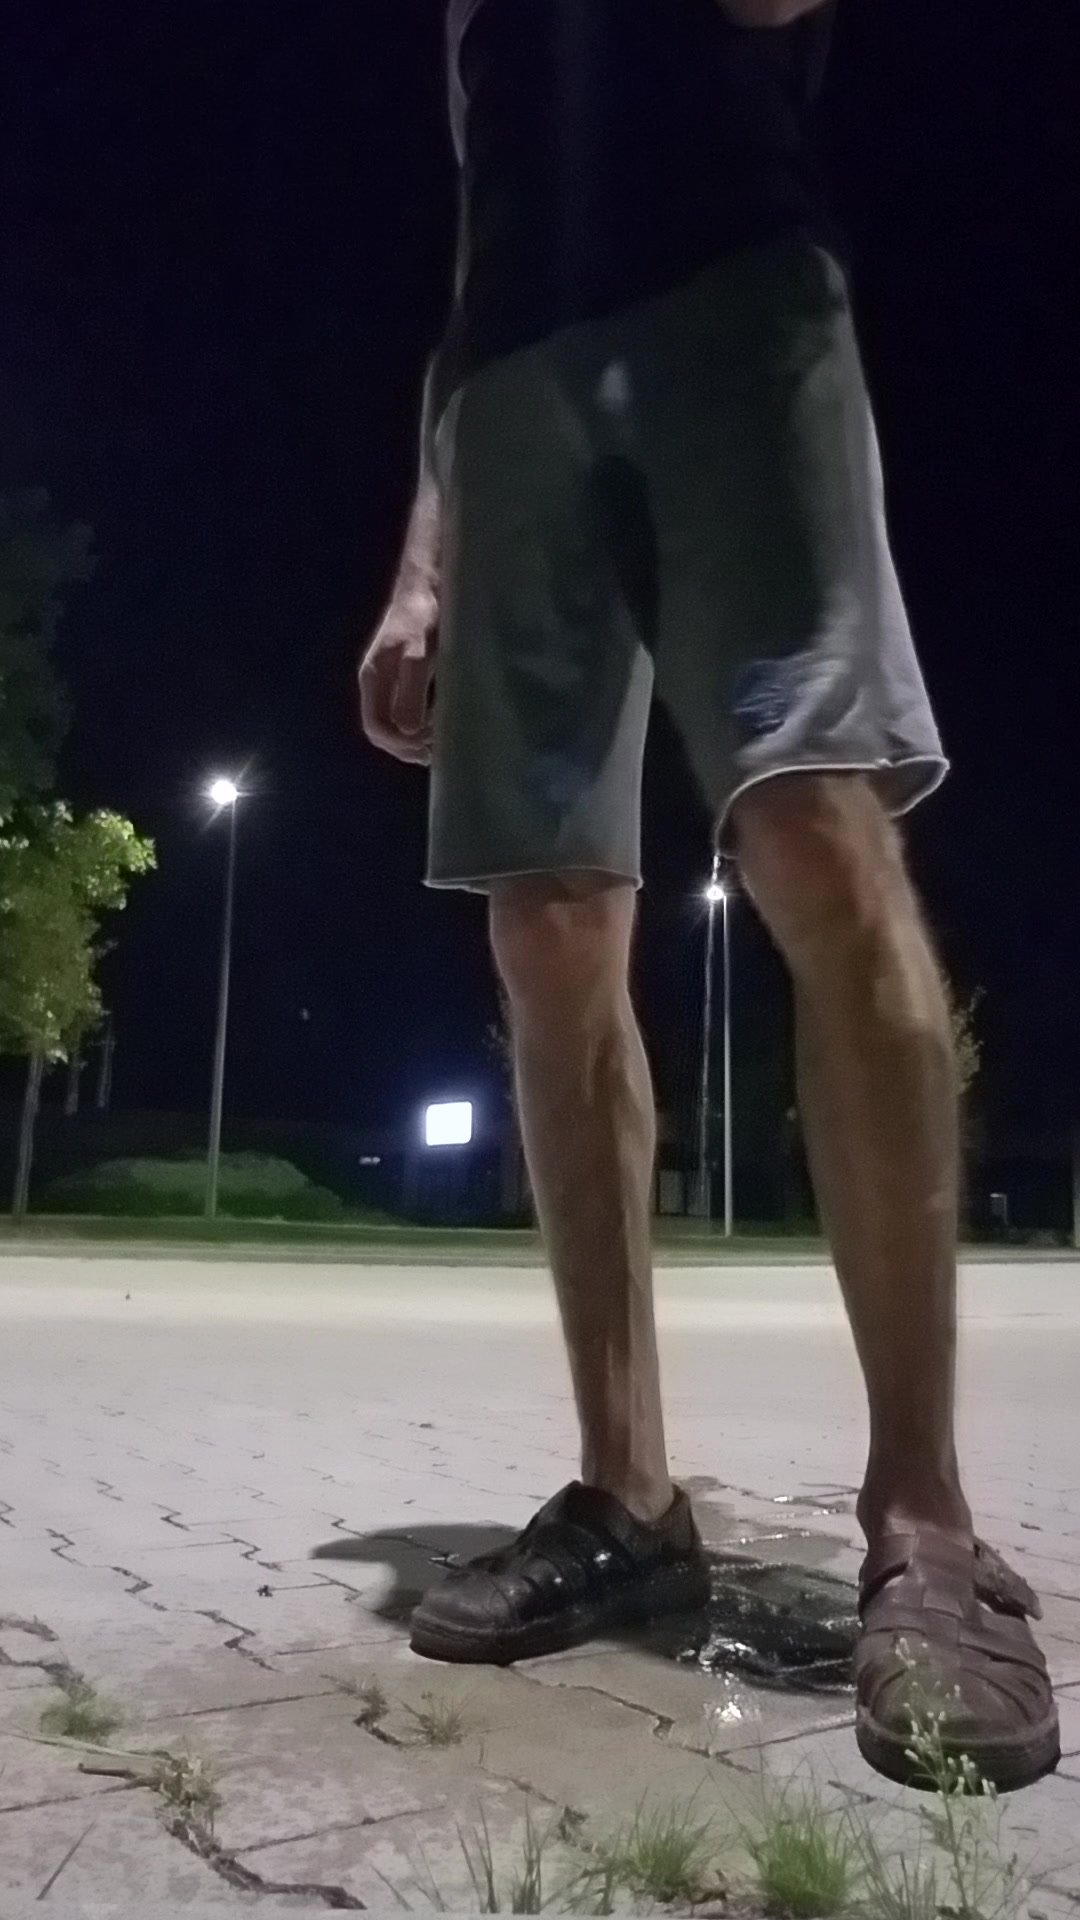 Piss in shorts in the night on a parking spot